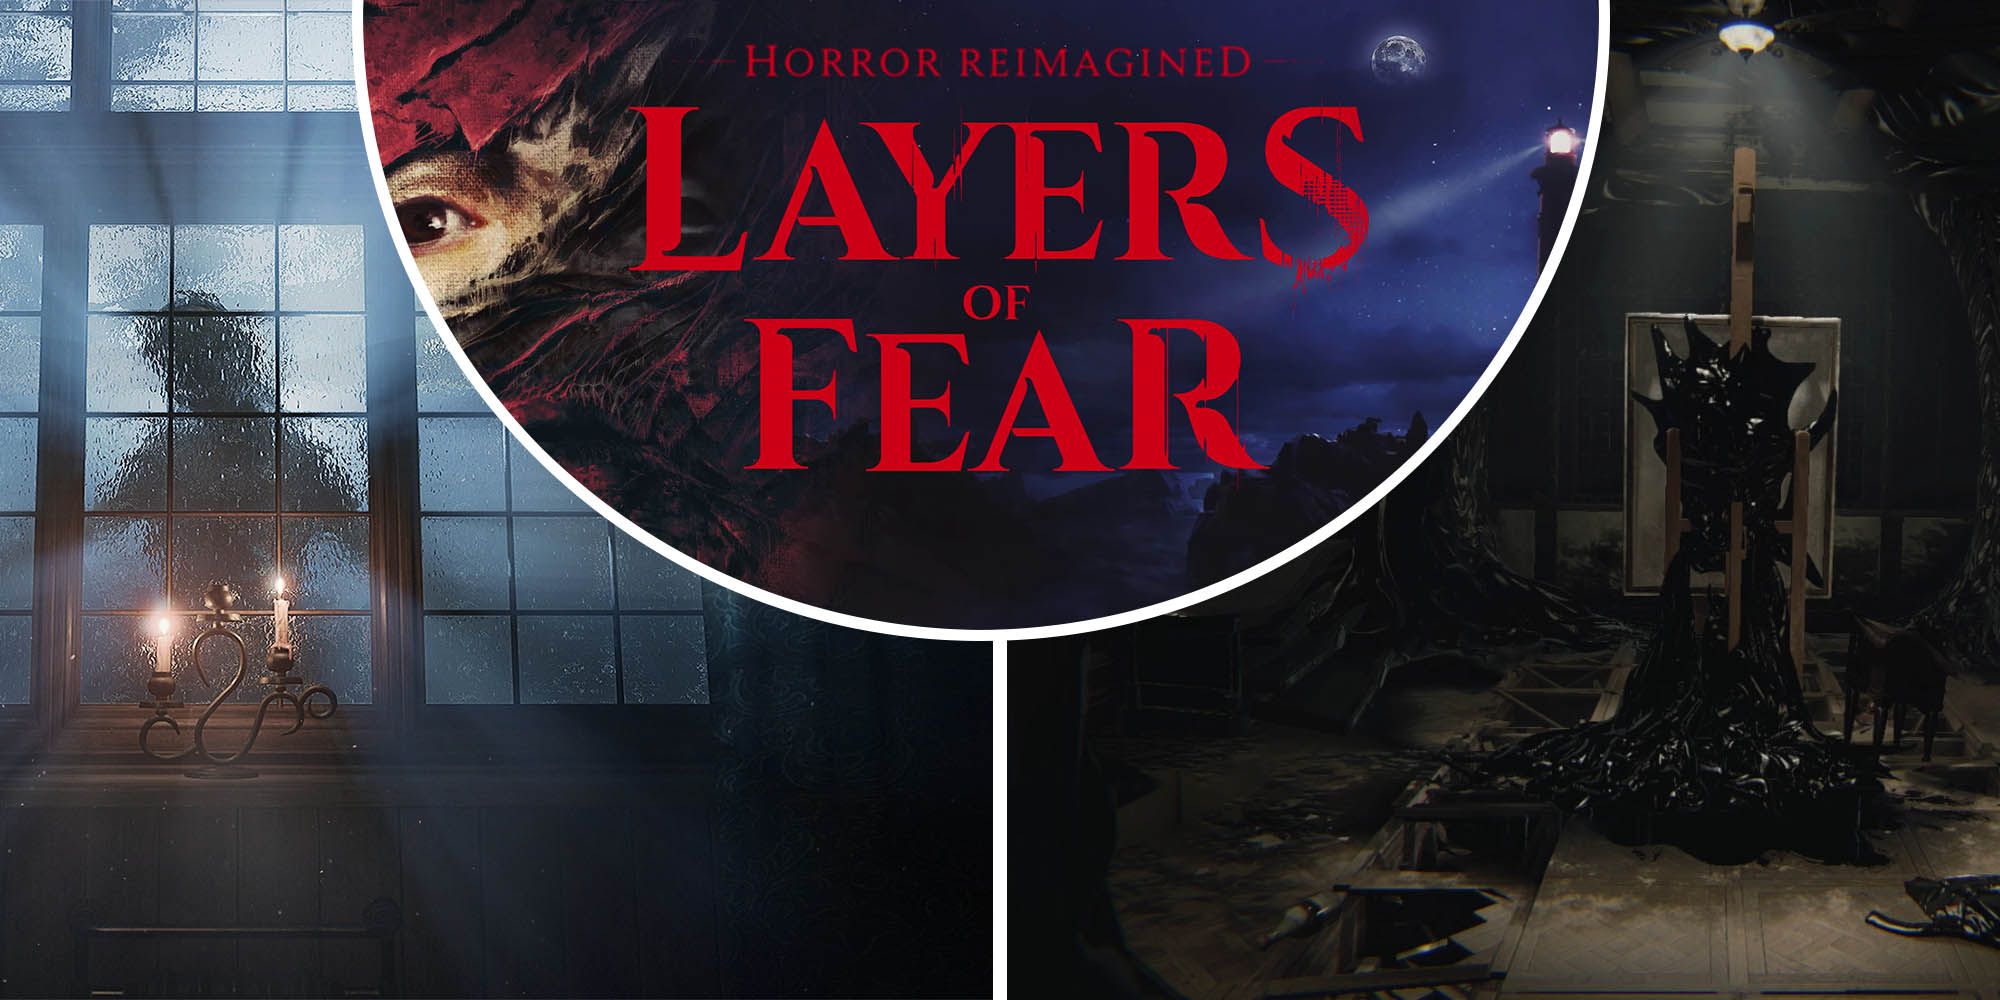 Layers of Fear reimagines horror with Unreal Engine 5